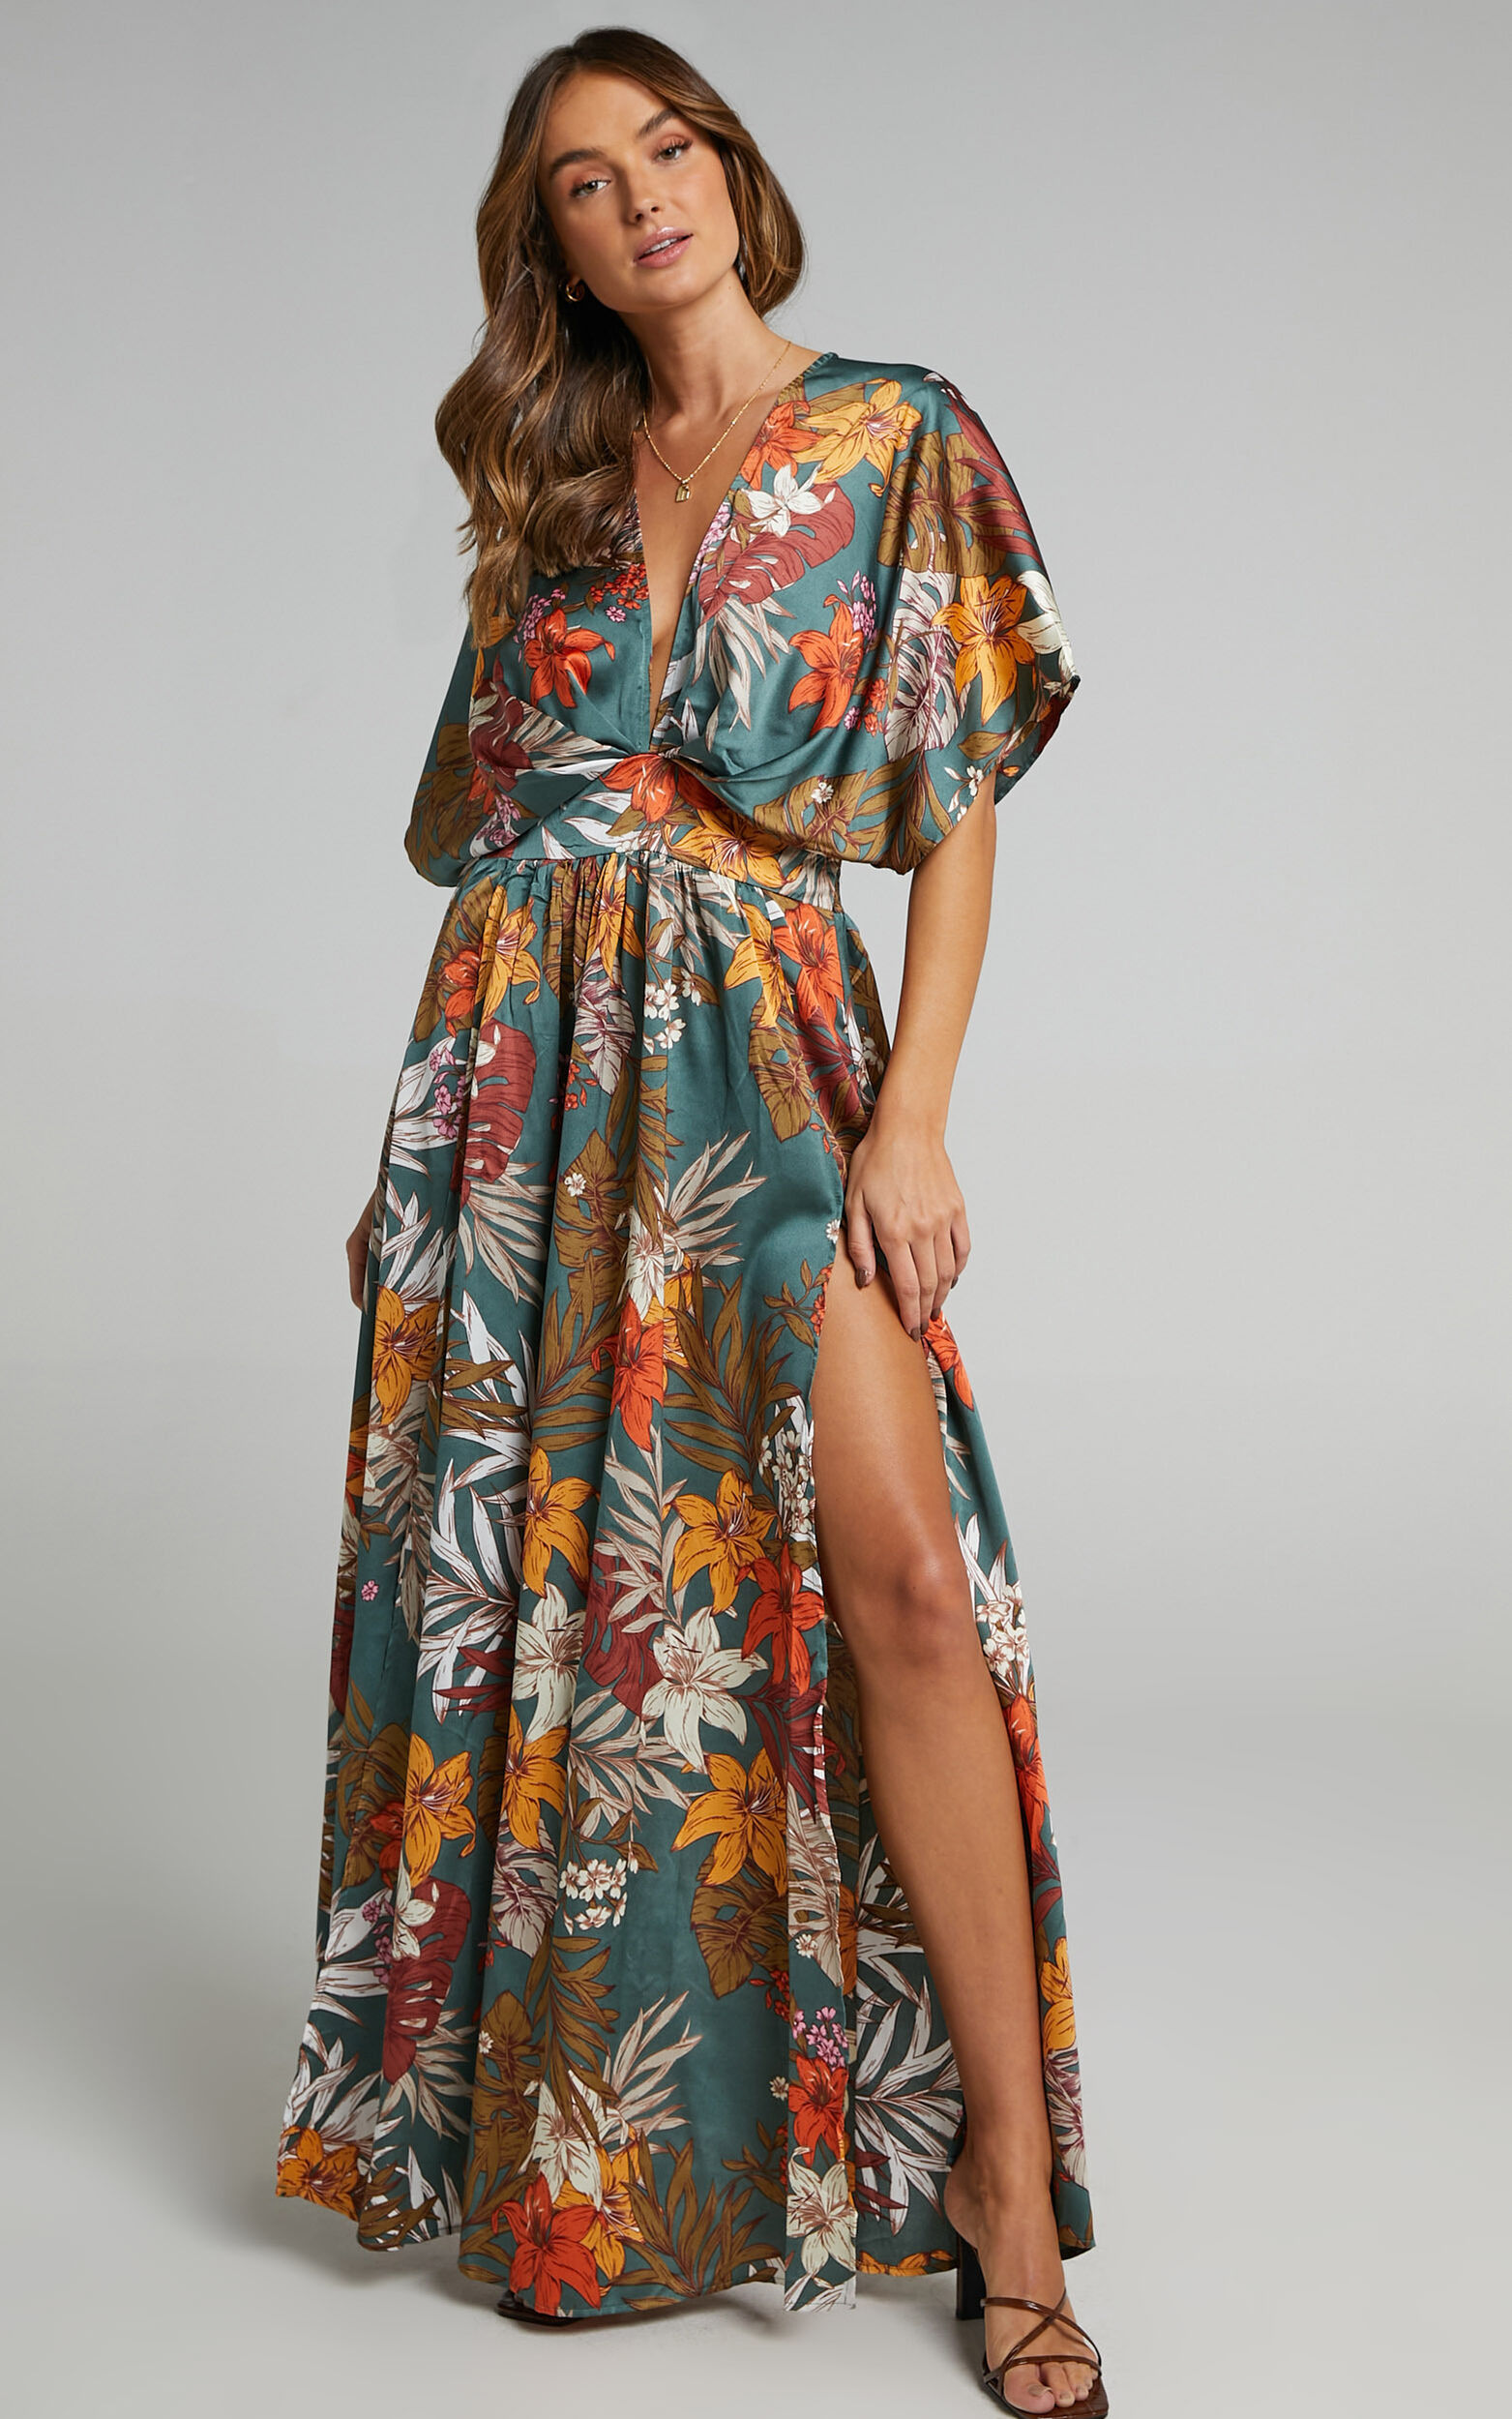 Vacay Ready Midaxi Dress - Plunge Thigh Split Dress in Teal Floral Satin - 20, BLU9